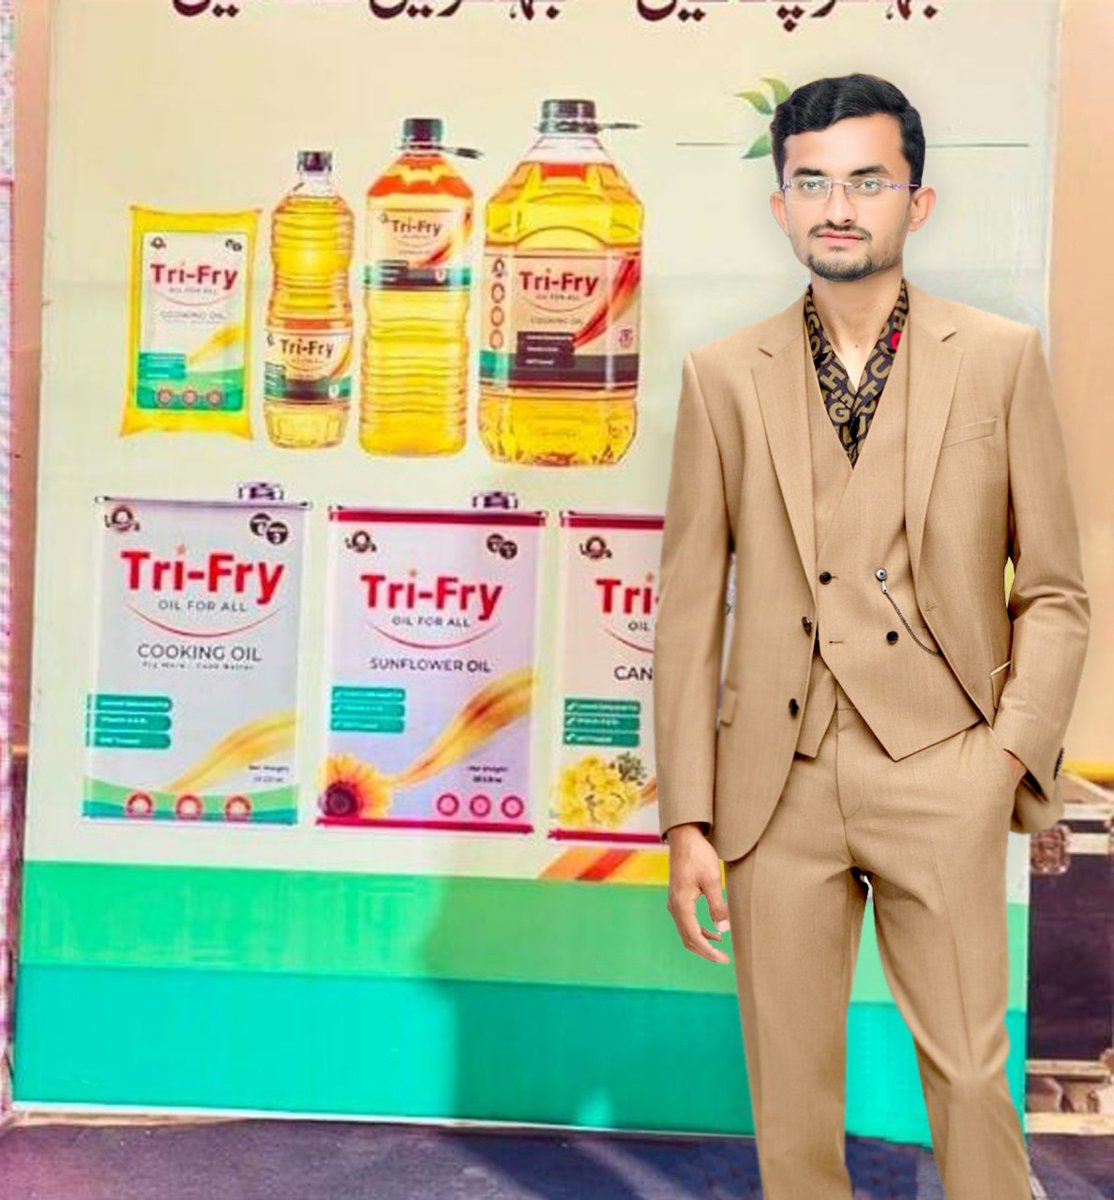 'DISCOVER THE NEW LEVEL OF TASTE & HAPPINESS' Your kitchen's best companion! بہتر پکائیں - بہترین کھائیں @tri_fry oil for all 🤩